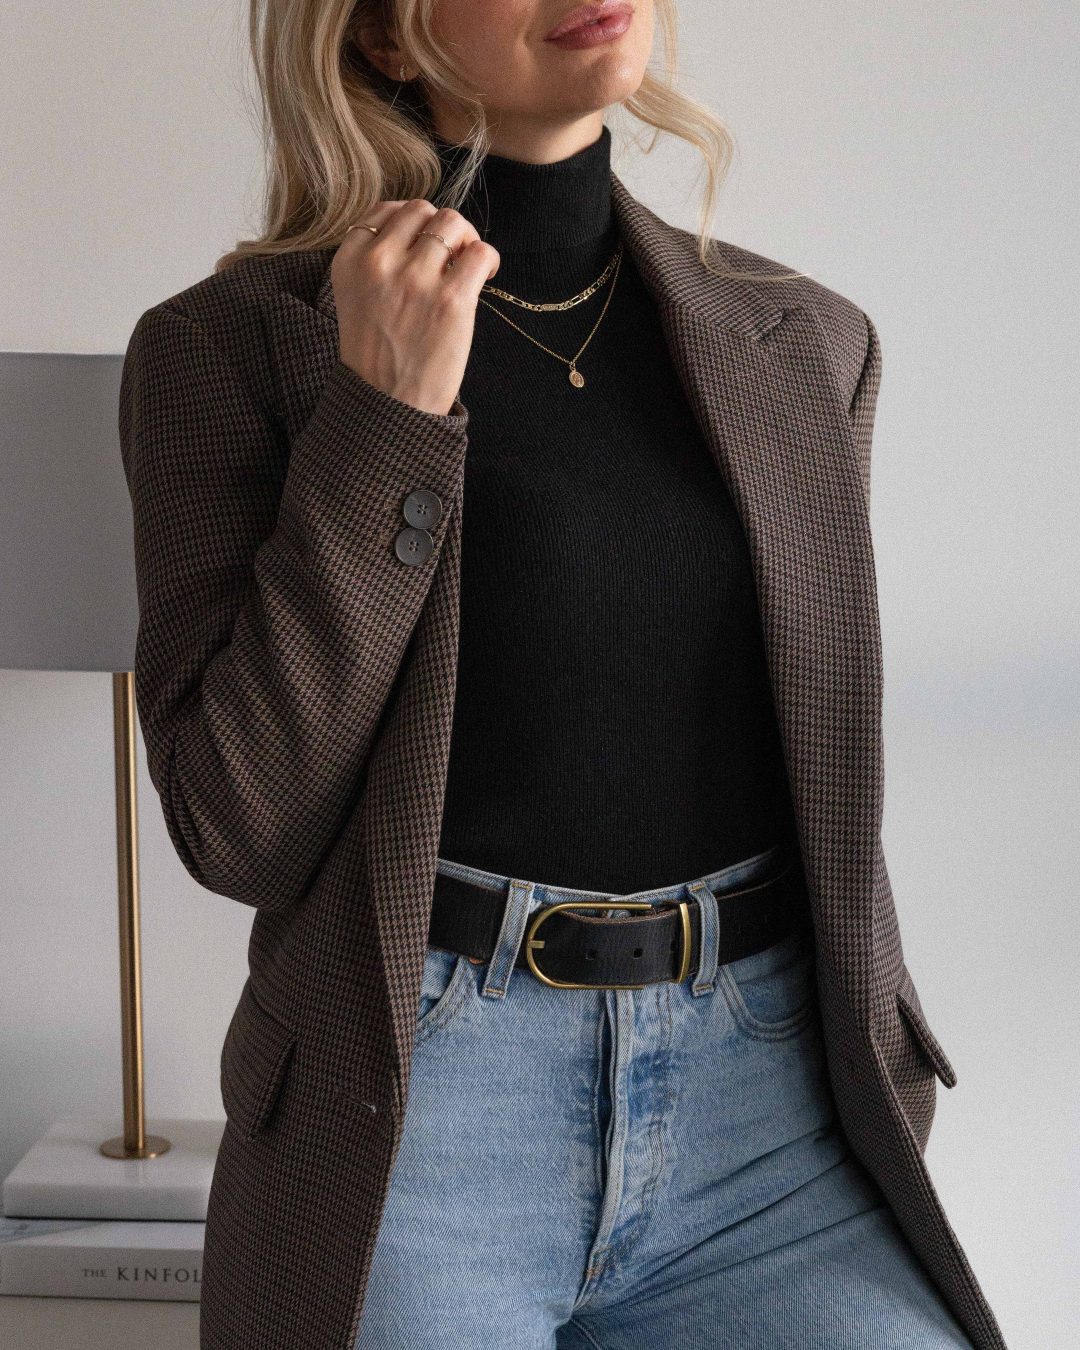 5 TRENDY FALL OUTFIT IDEAS for 2020